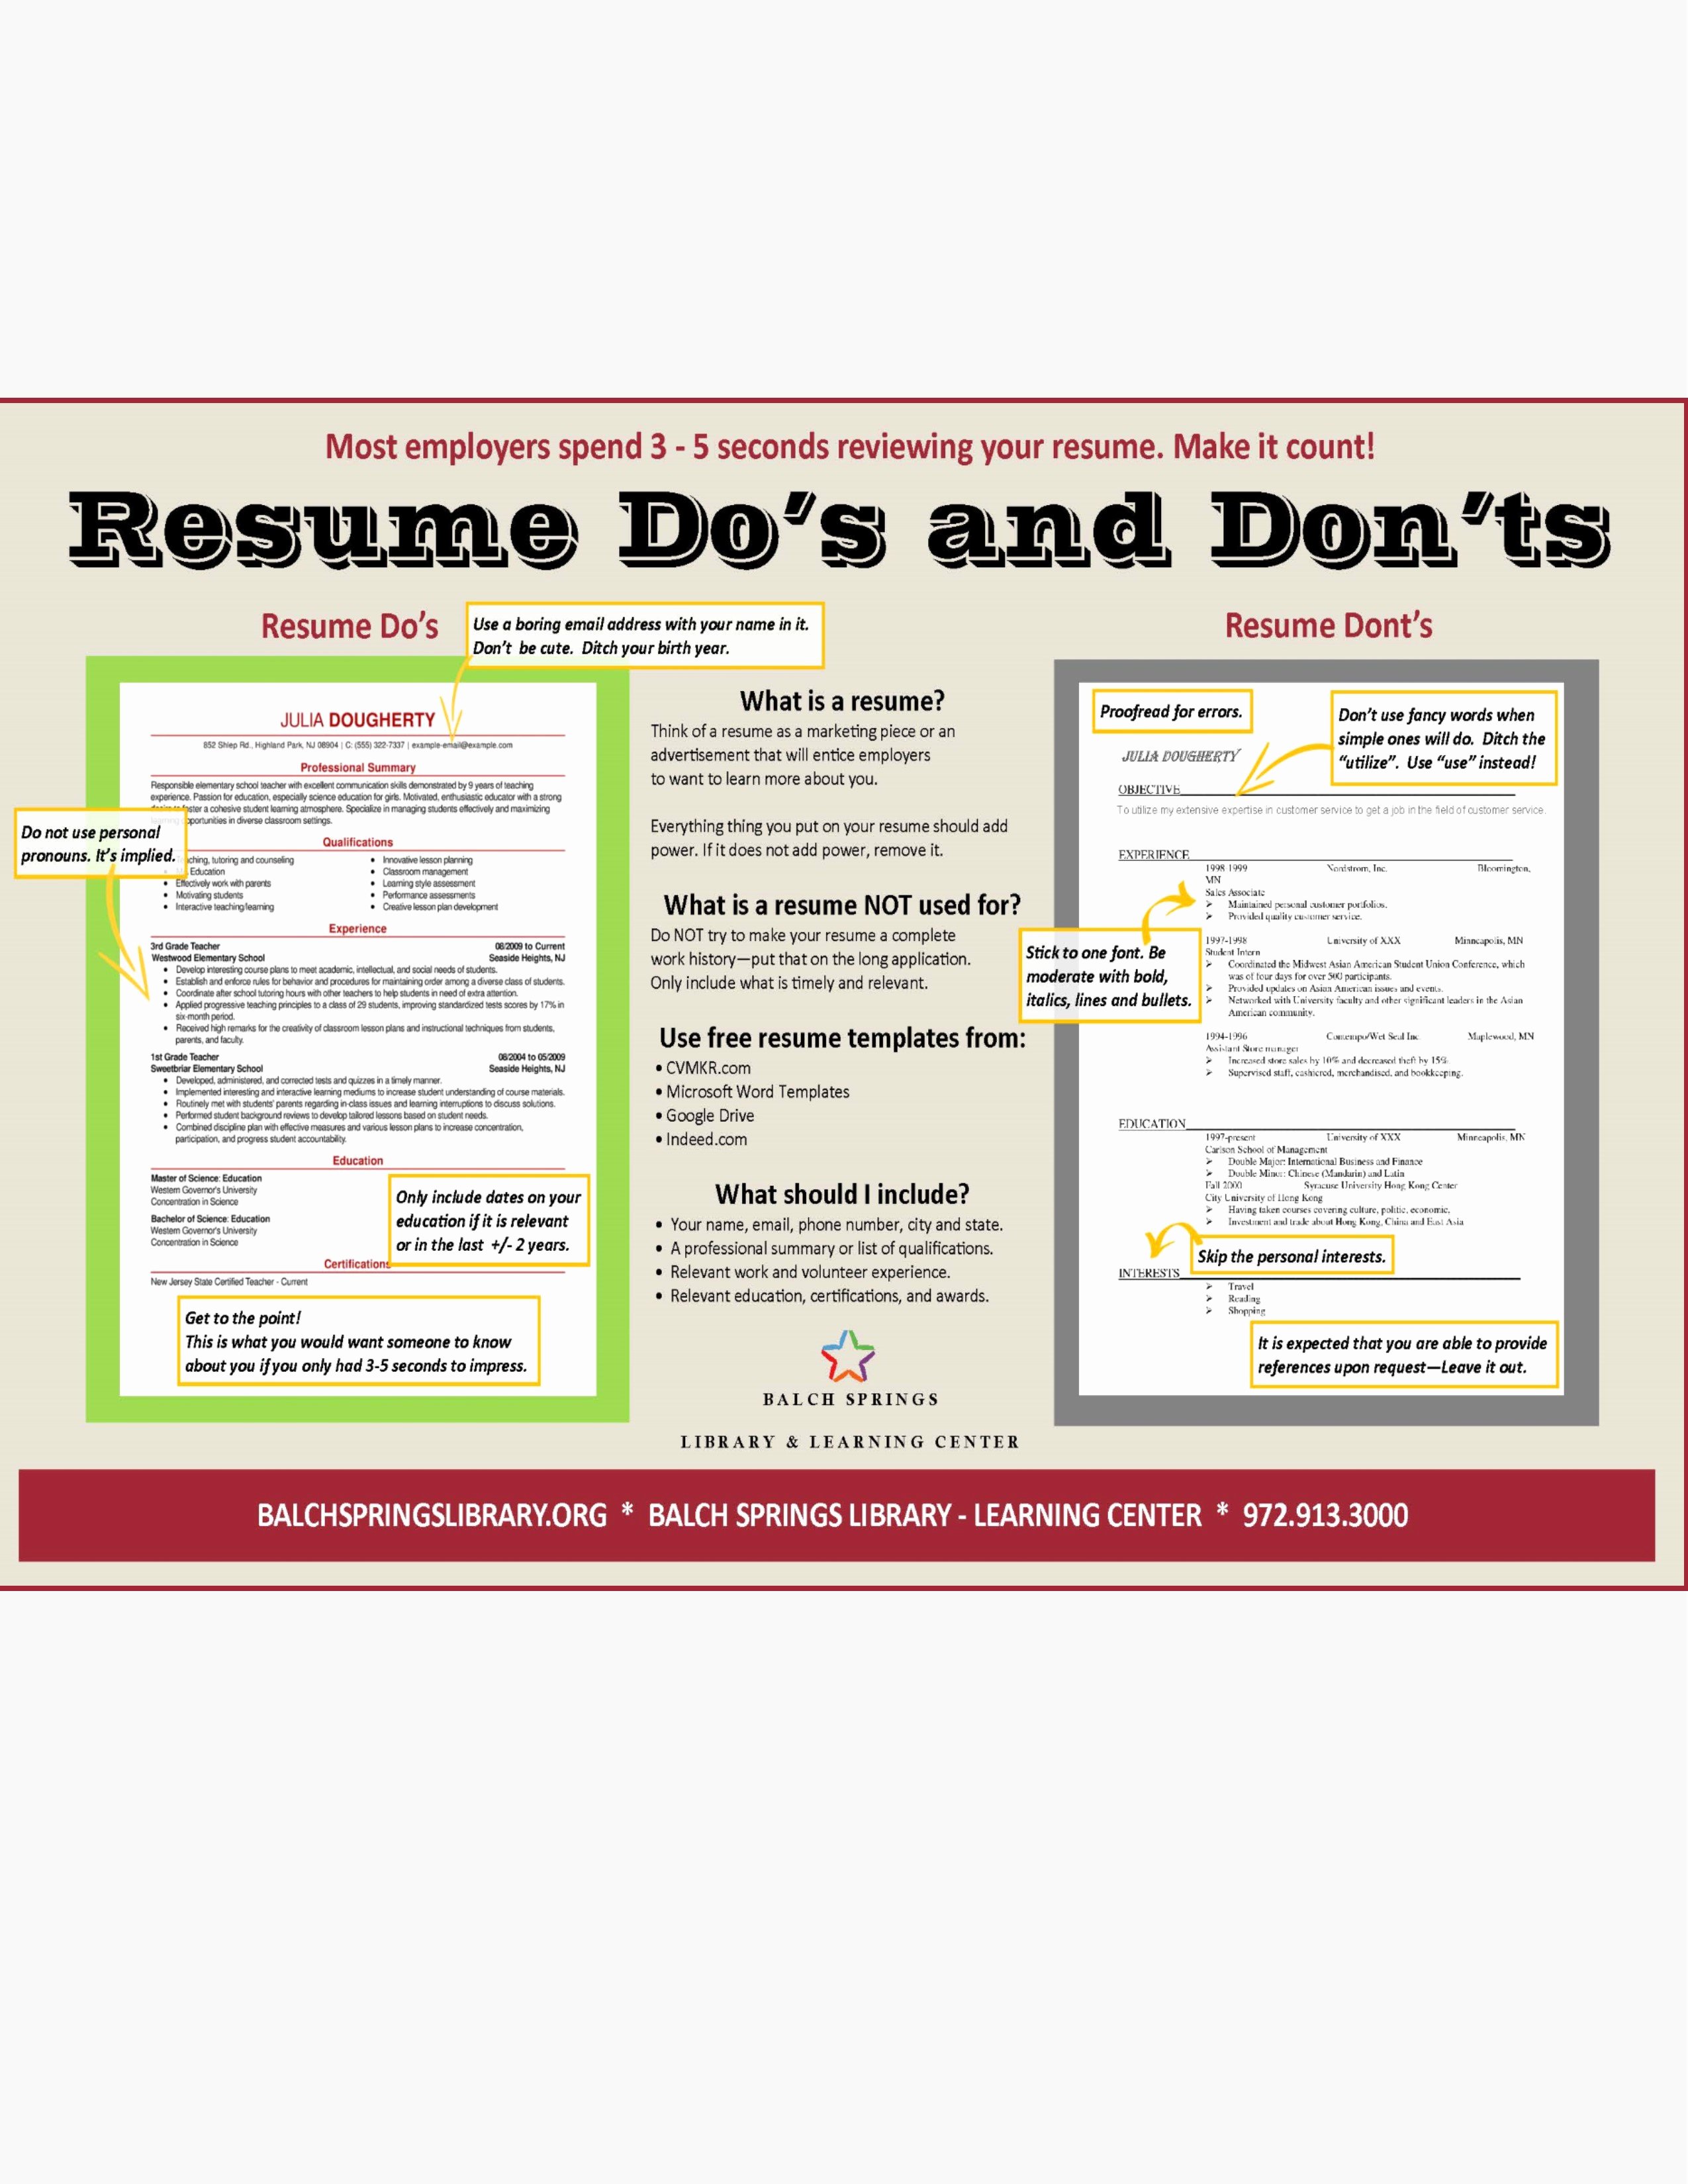 Resume Dos and Don Ts